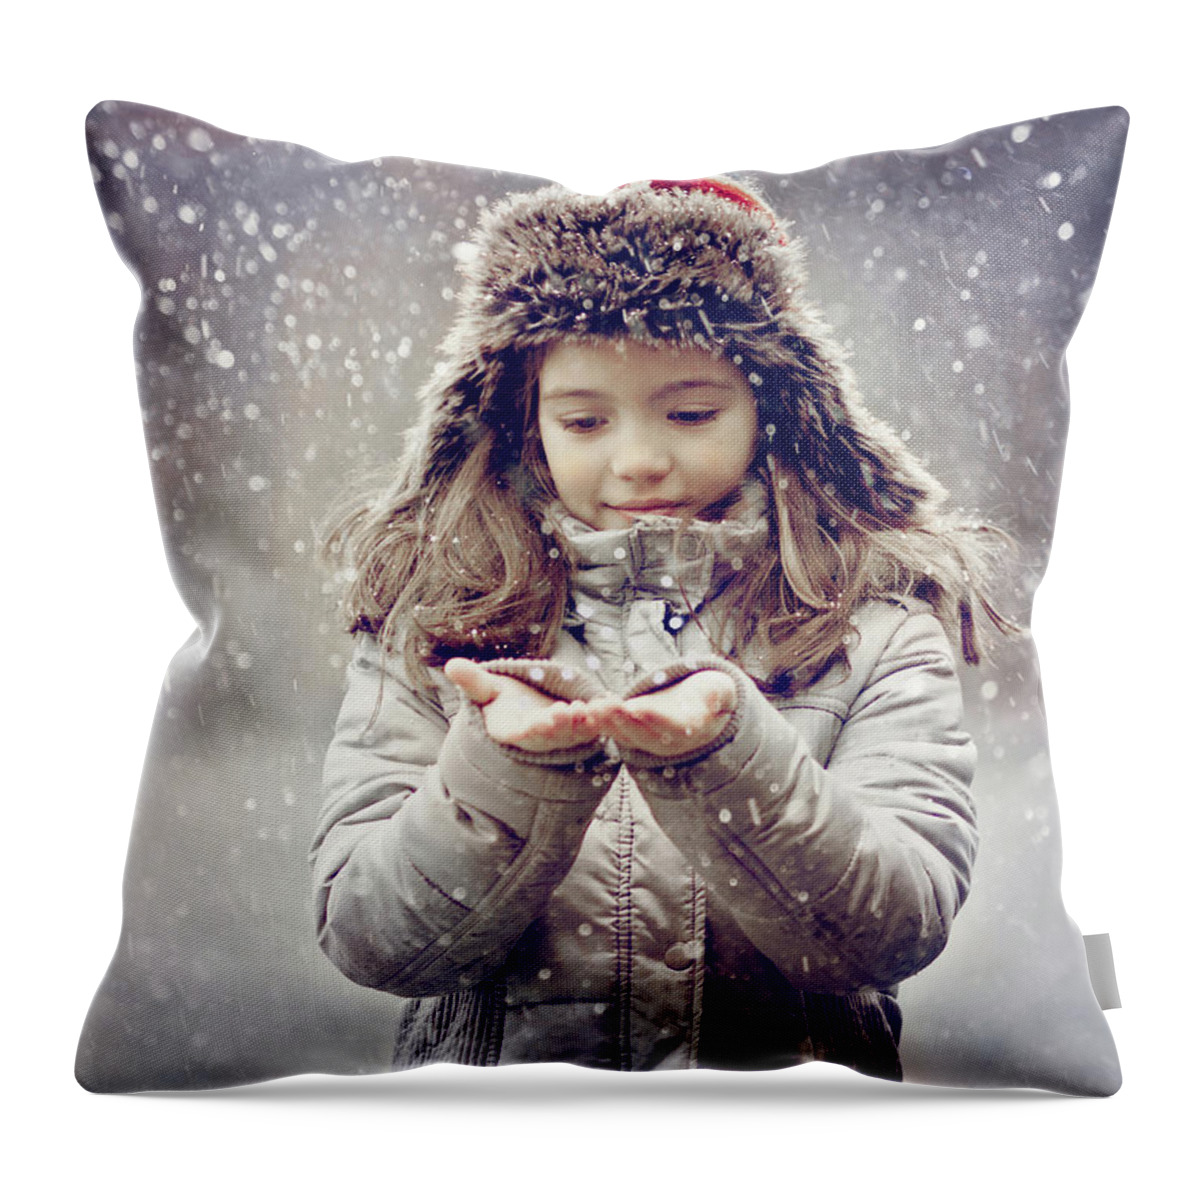 Bulgaria Throw Pillow featuring the photograph Child And Snow by Diana Kraleva